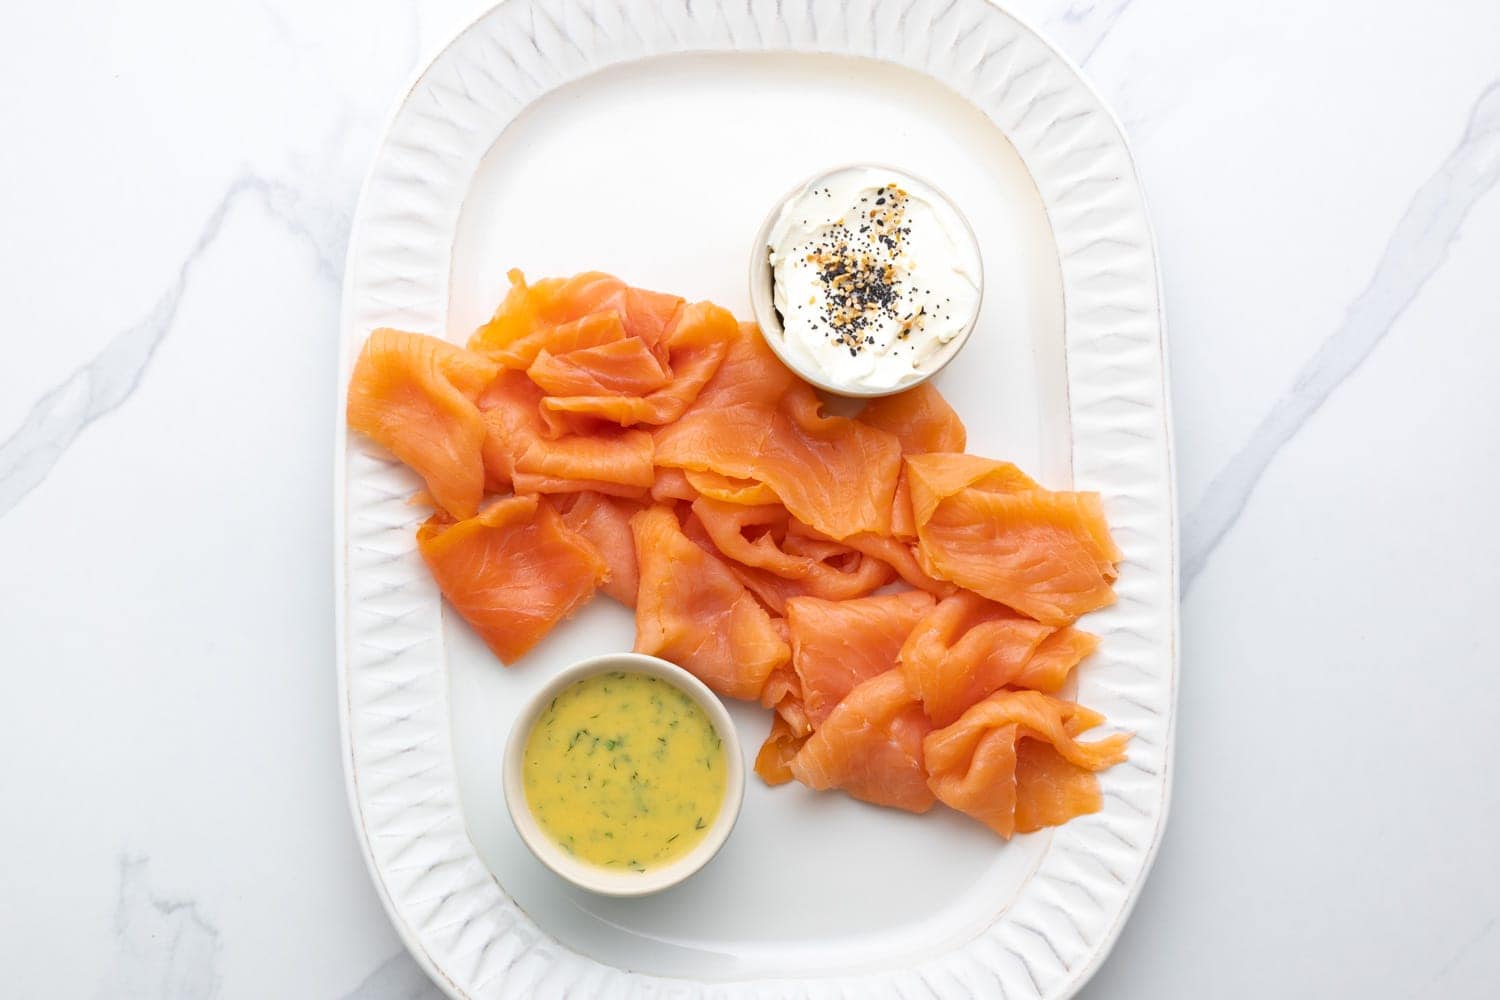 Slices of smoked salmon added to a white ceramic platter with sauces.